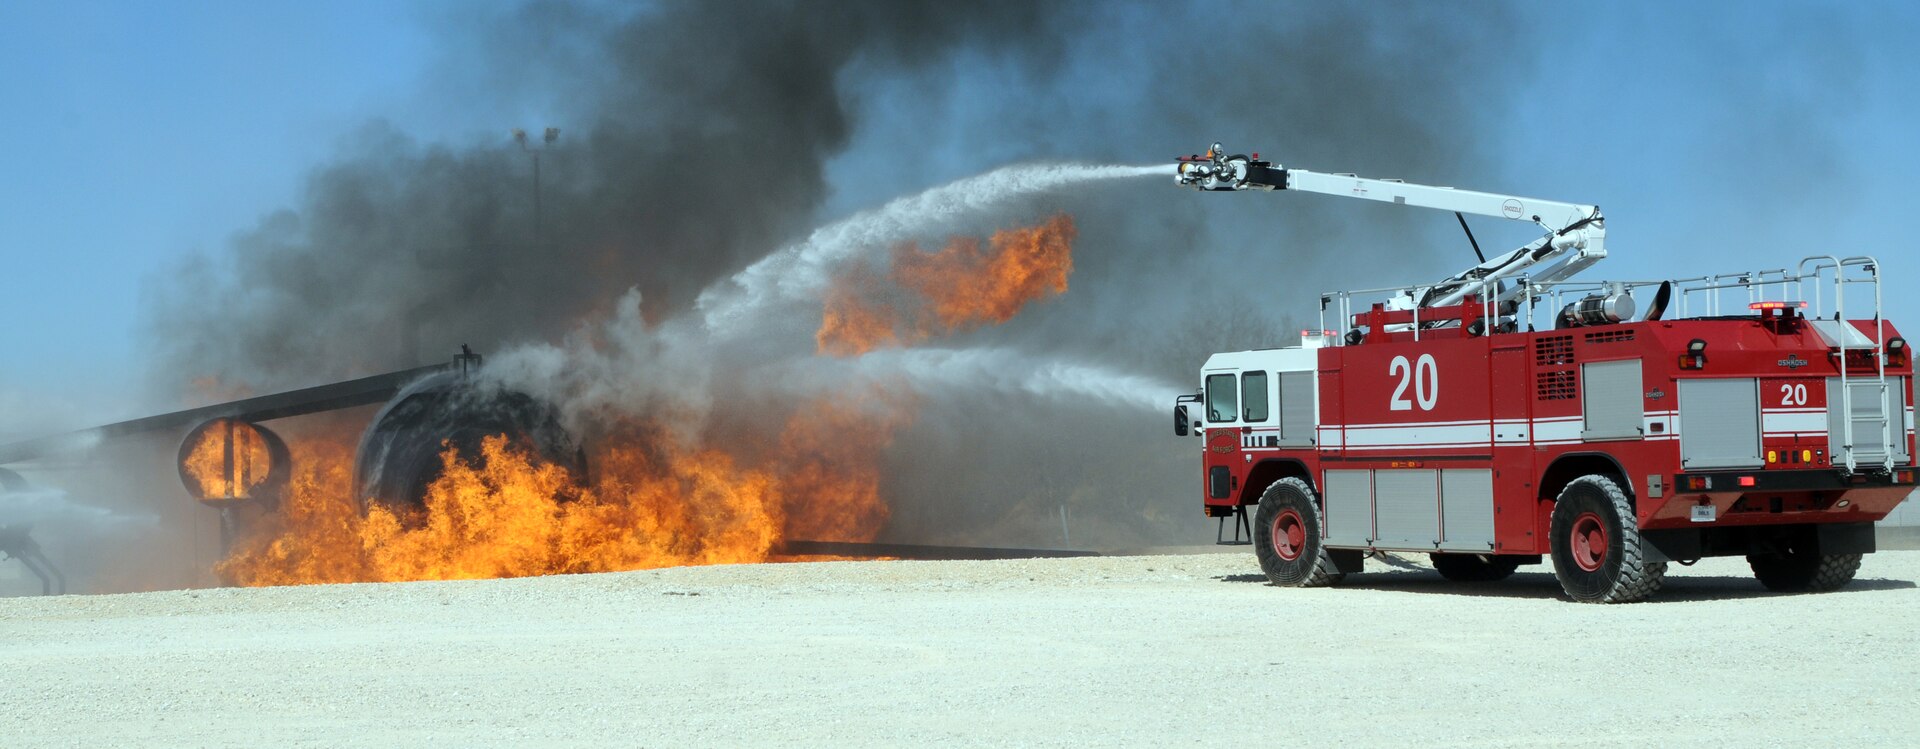 A Randolph Fire Emergency Services vehicle demonstrates how to extinguish an aircraft fire during a training session at the fire training facility here Feb. 1. Several local fire departments visited Randolph to train on proper response procedures to downed 12th Flying Training Wing aircraft in the event one crashed in their city. (U.S. Air Force photo by Steve White)